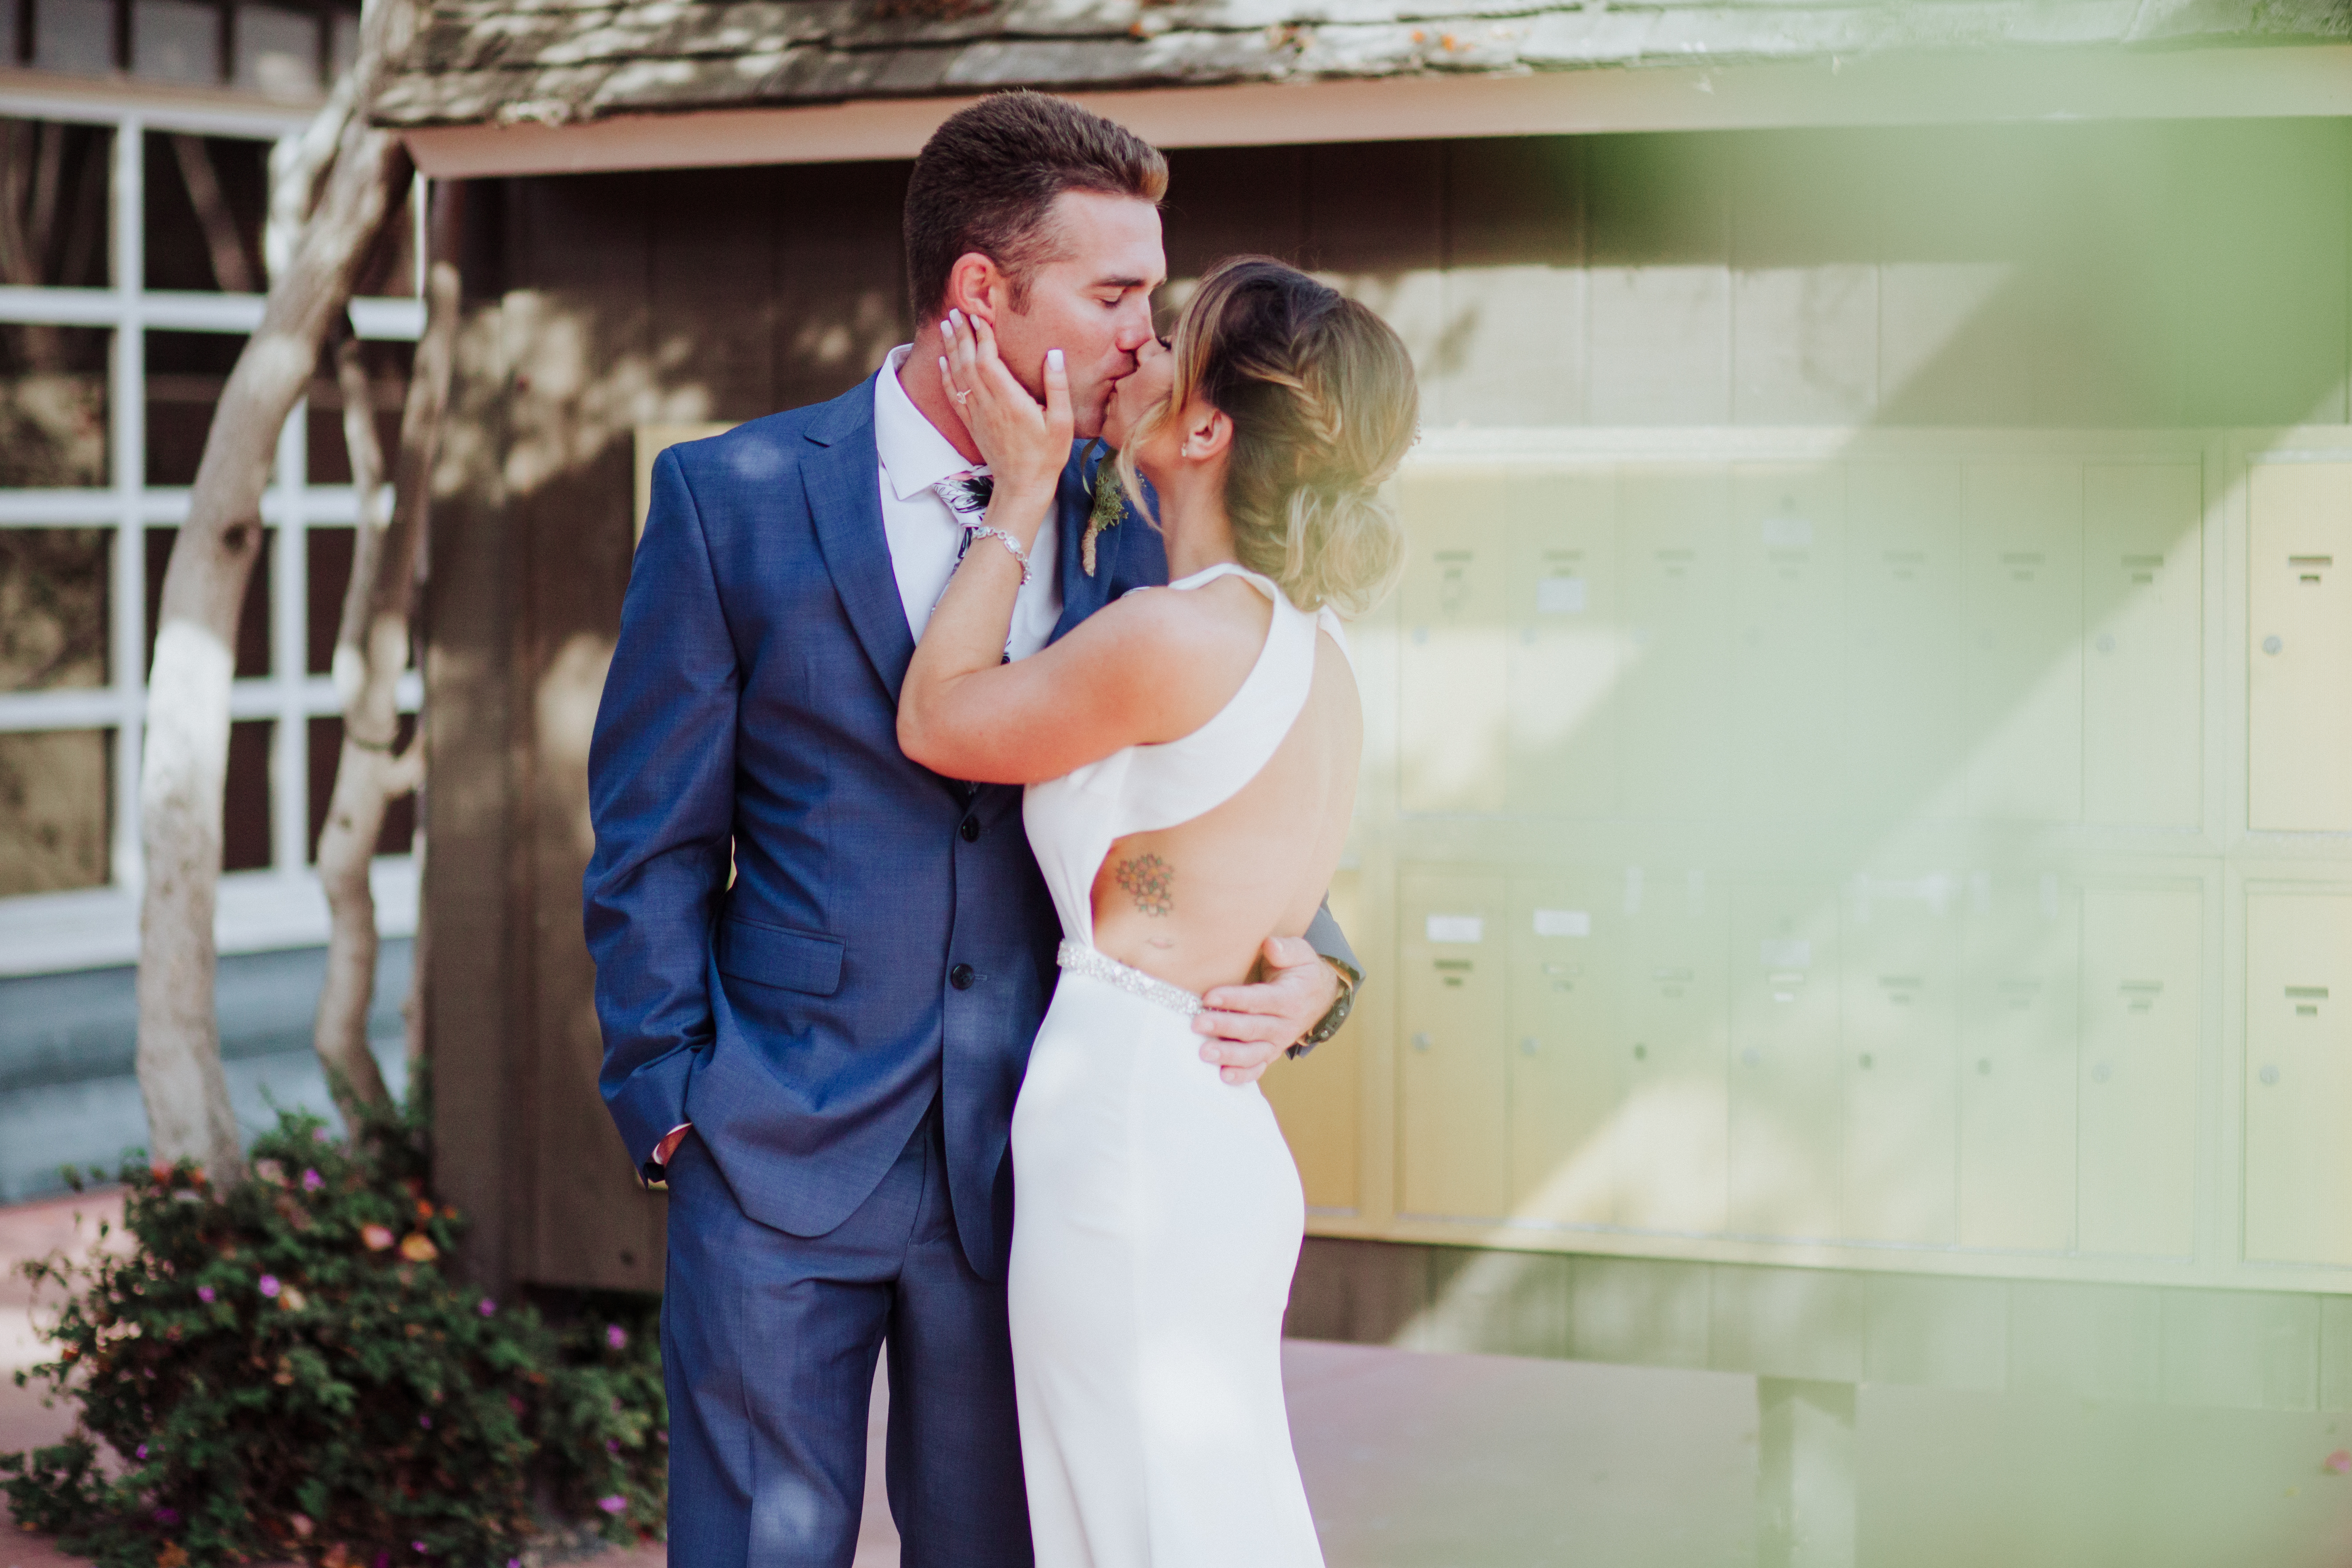 Bride and groom portraitsat a Romantic Style San Diego Wedding at Marina Village by Kylie Rae Photography